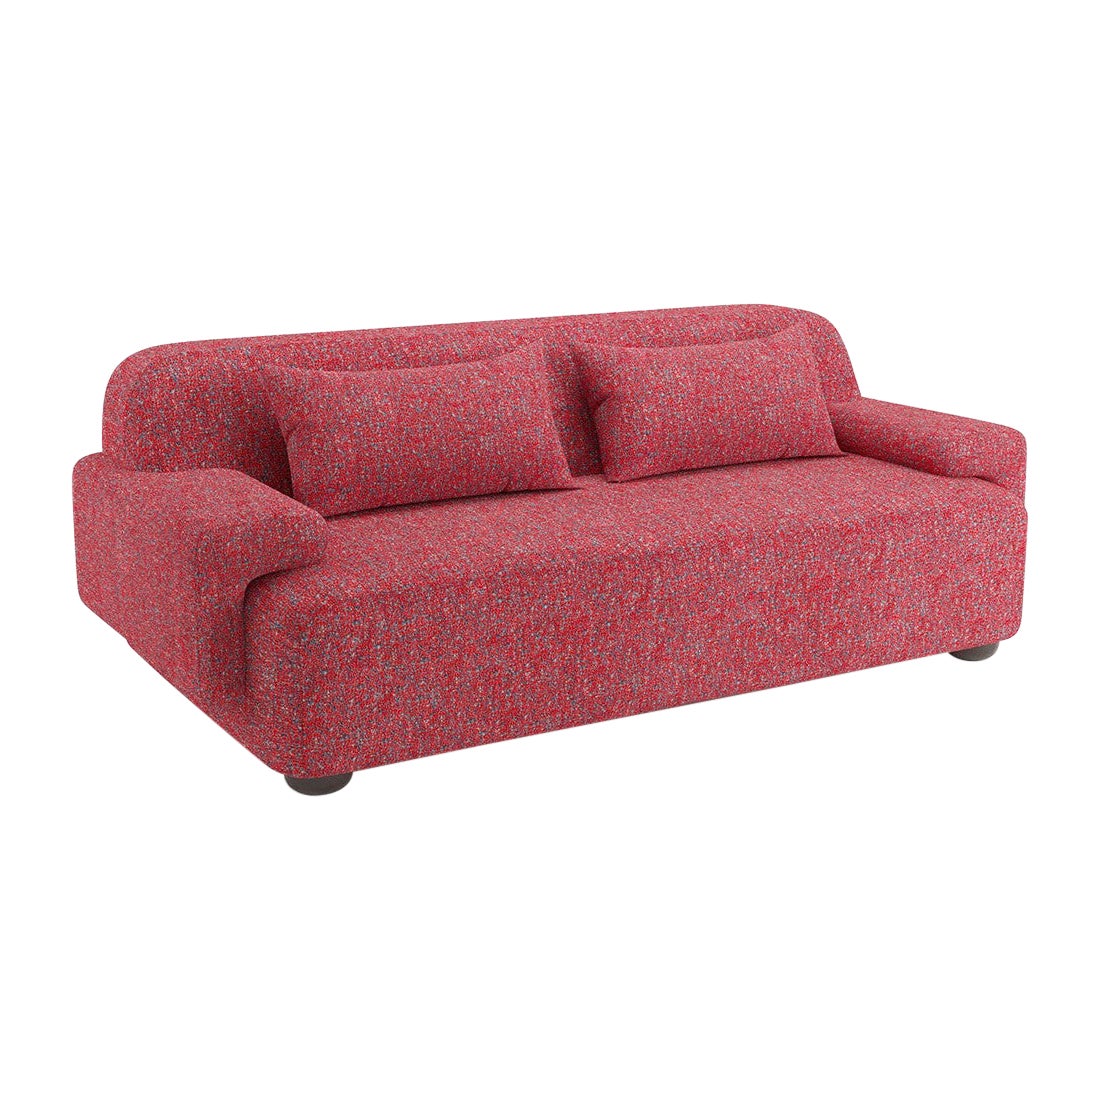 Popus Editions Lena 3 Seater Sofa in Cayenne Zanzi Linen & Wool Blend Fabric For Sale